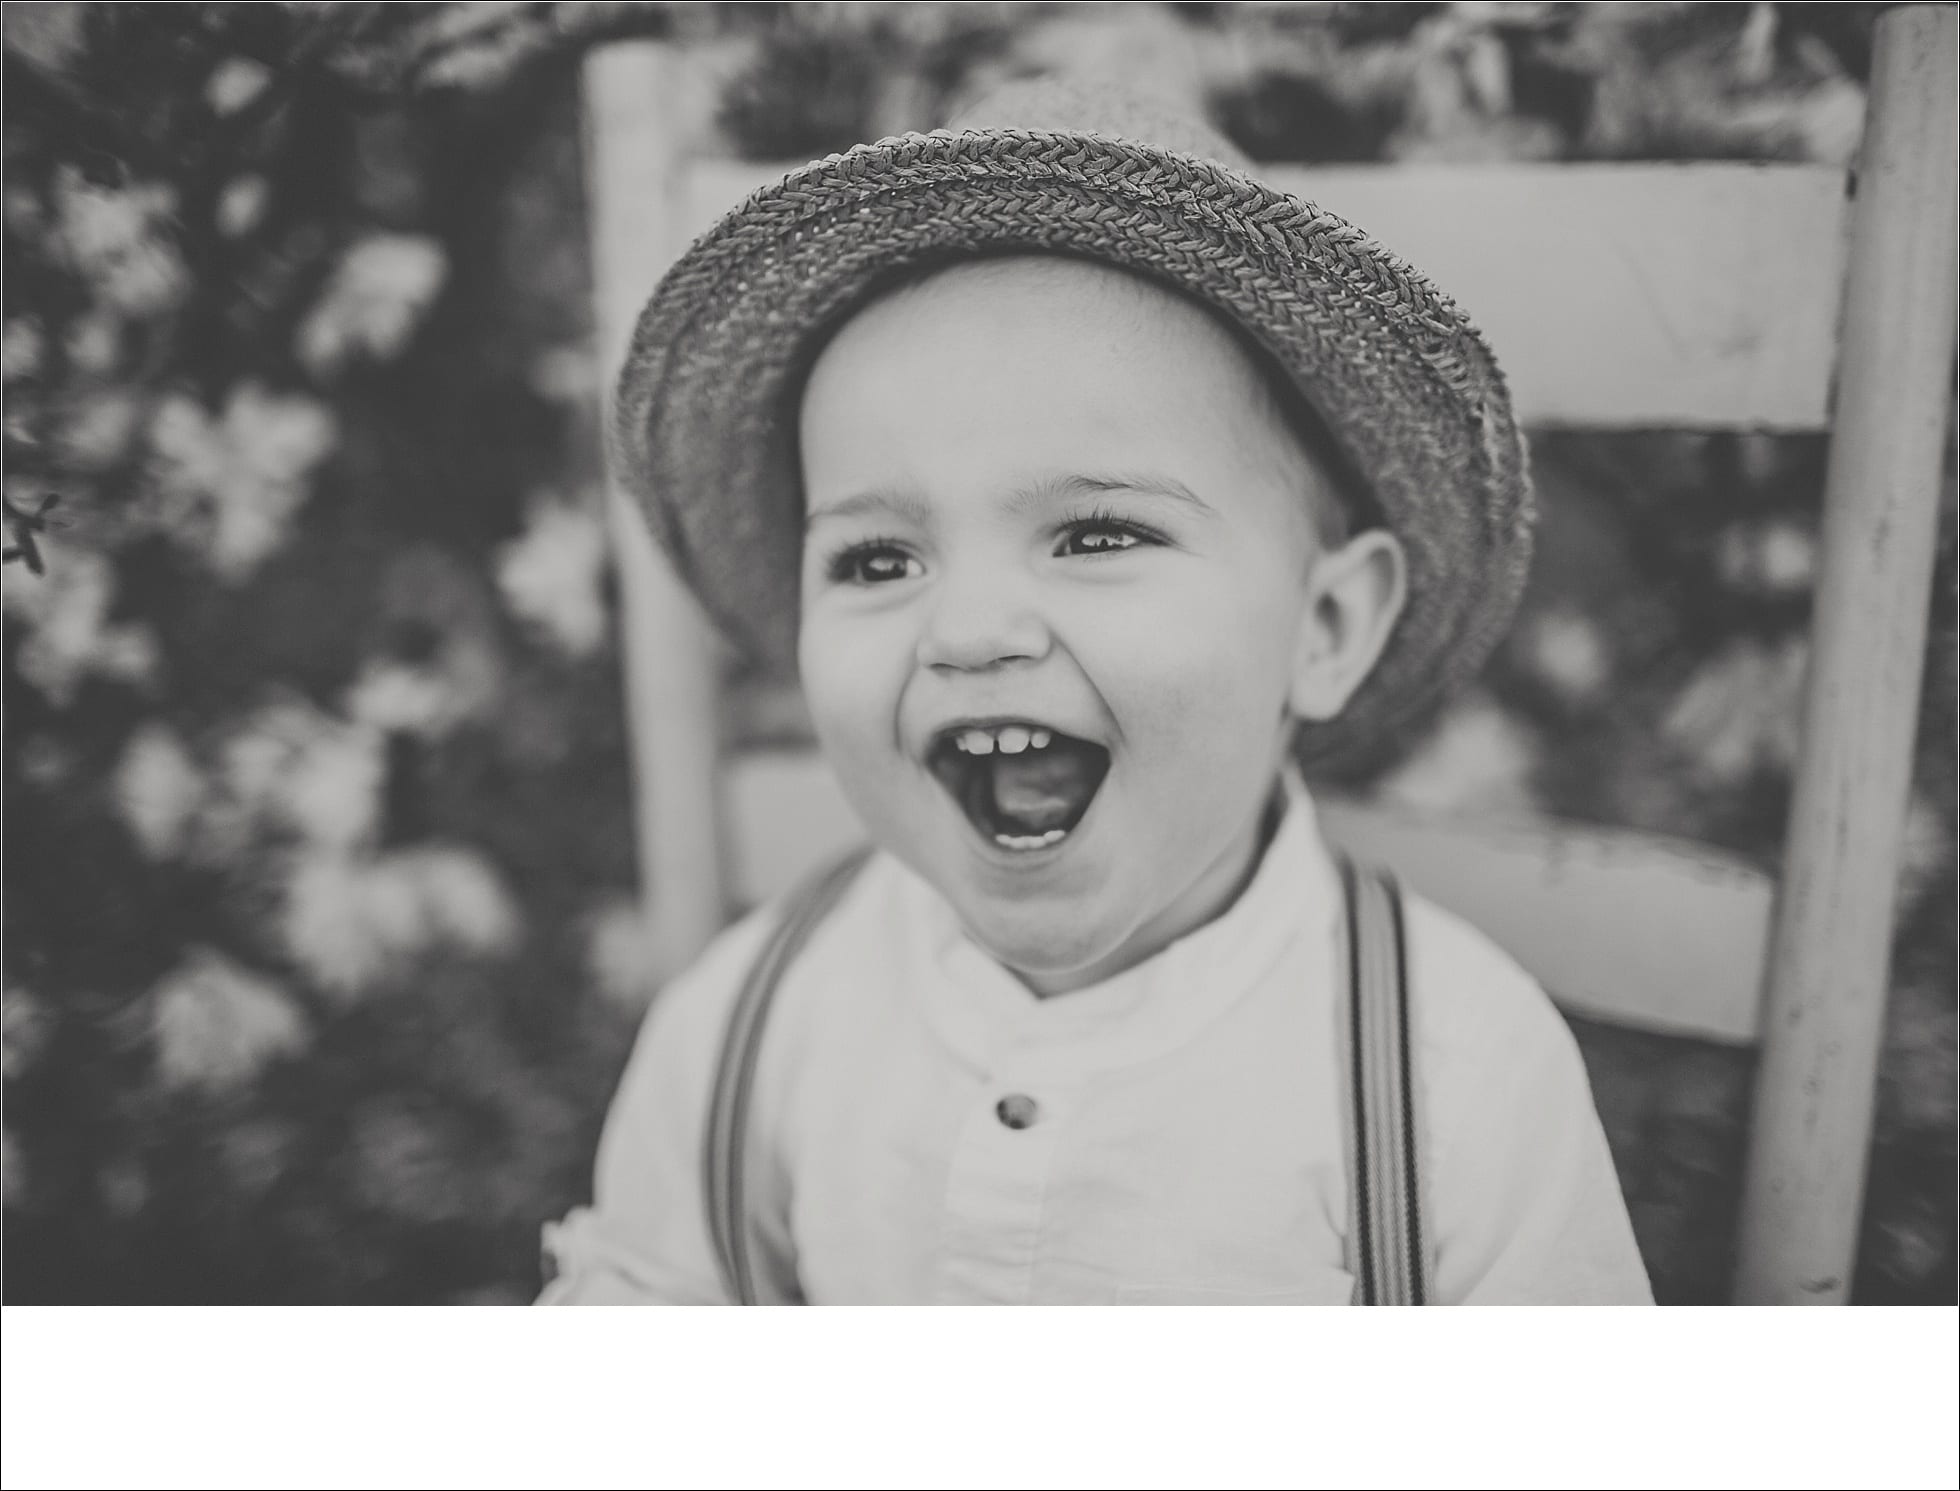 hats, fedoras, suspenders, children photography, sun prairie area family sessions